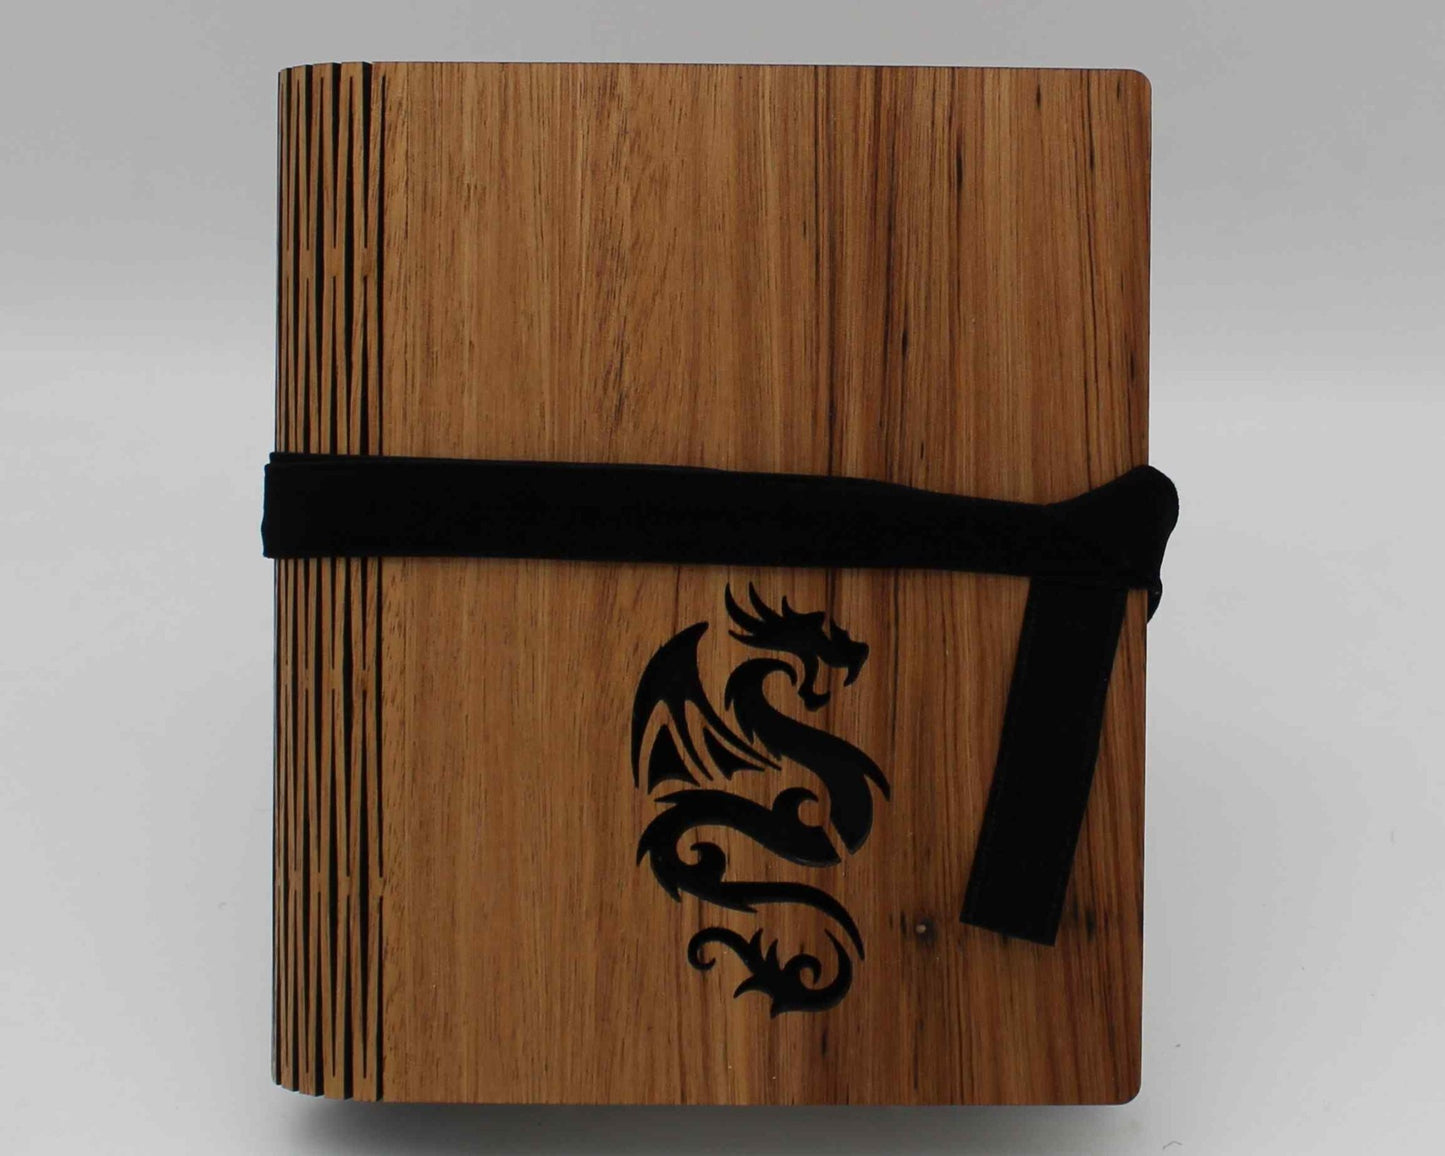 Wooden Living Hinge Note Book (A5) - Haisley Design